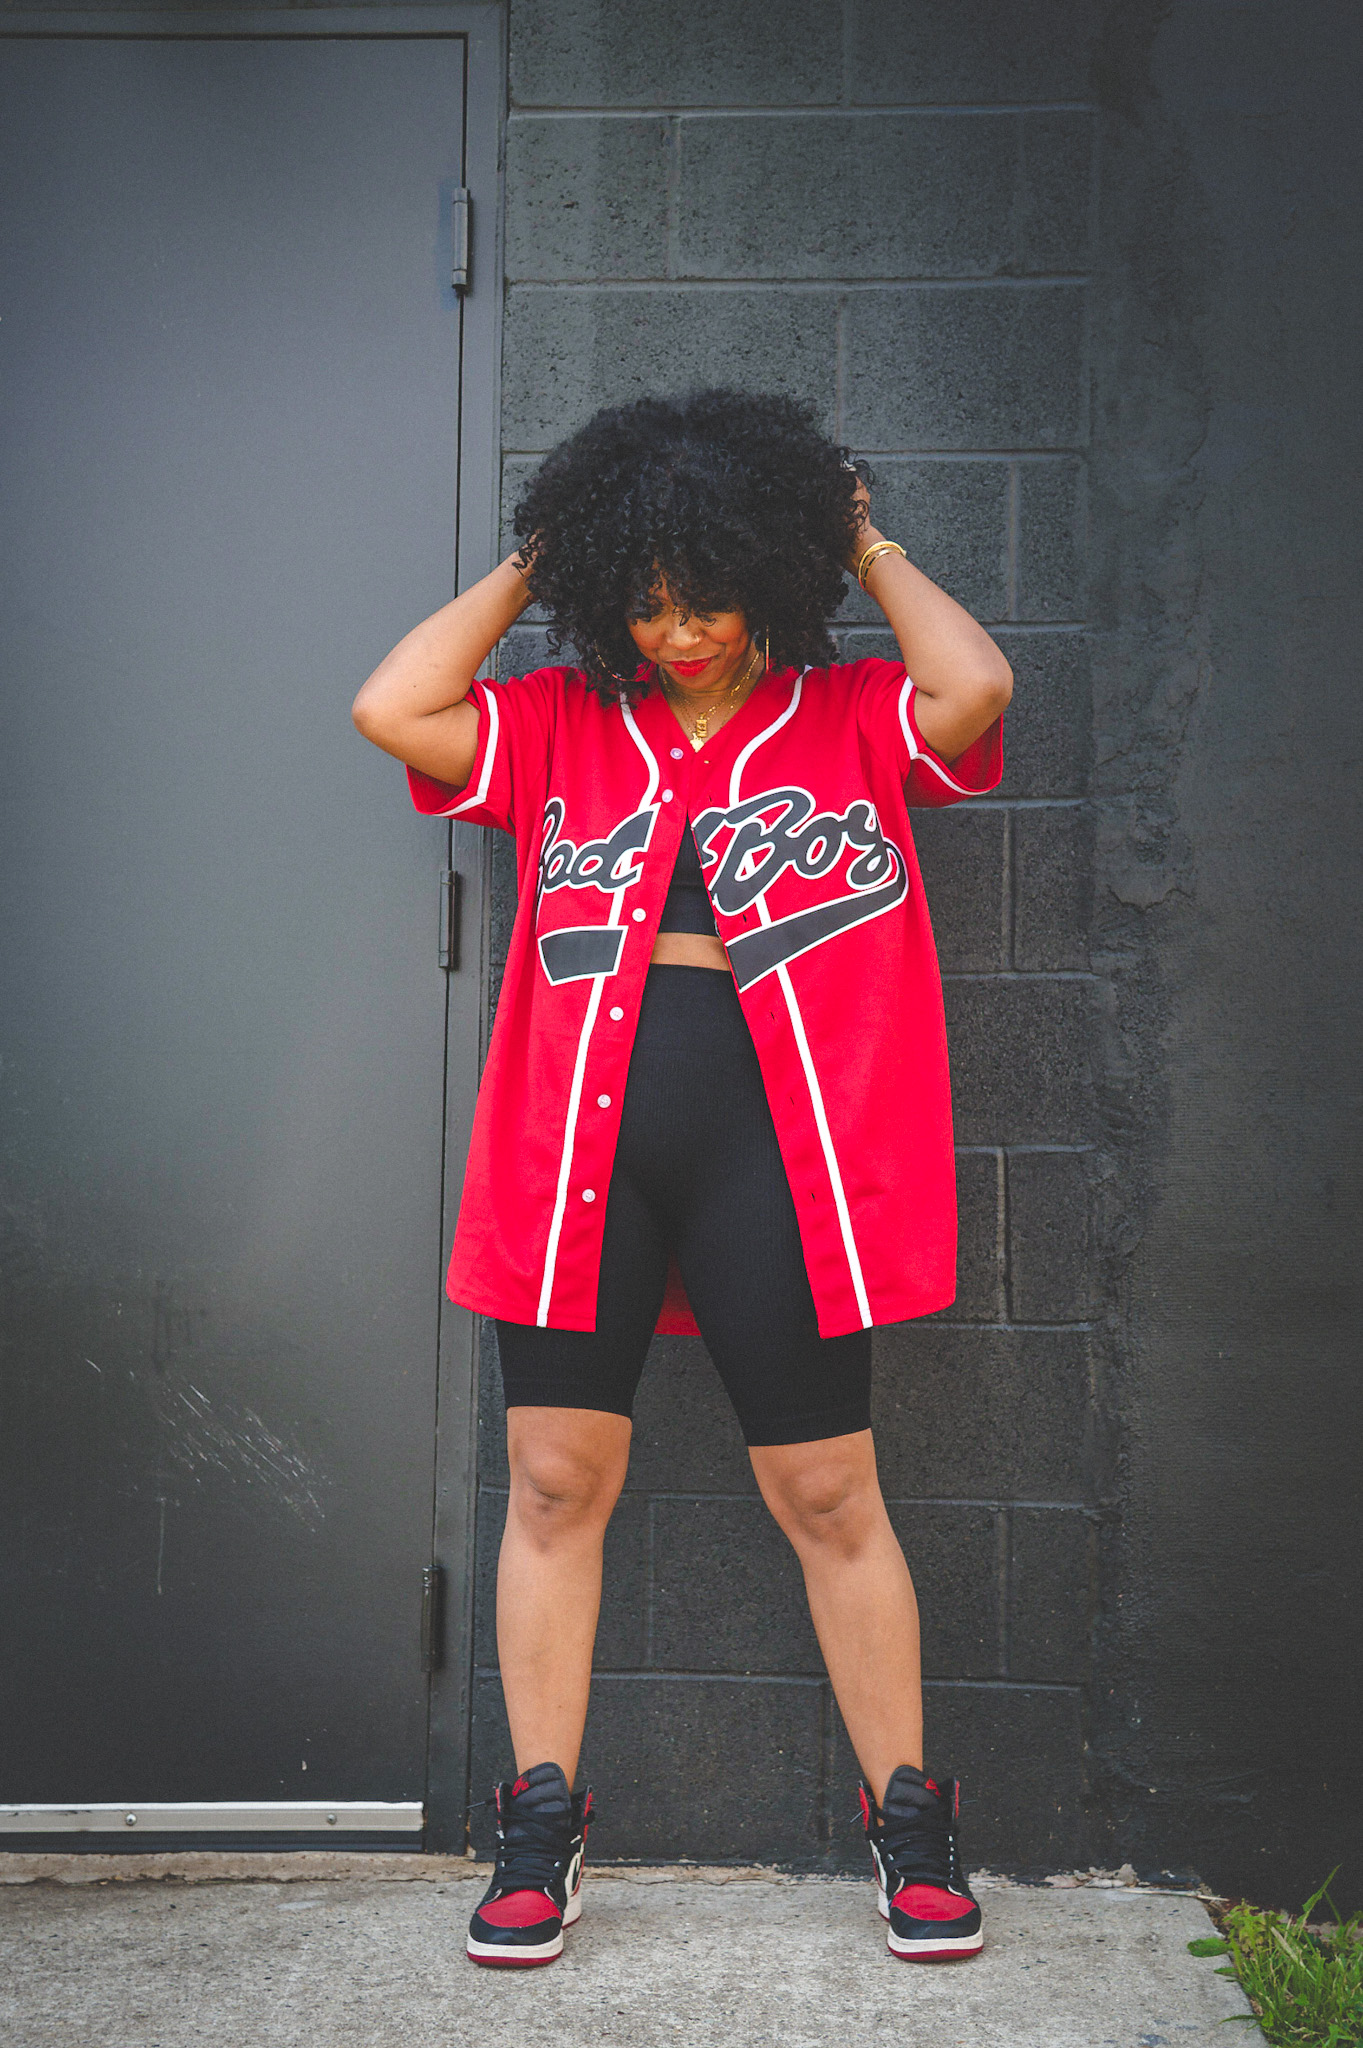 SWEENEE STYLE, STYLE INFLUENCER,5 RELAXING WEEKEND OUTFIT IDEAS, HOW TO STYLE FOR SUMMER, SUMMER OUTFIT IDEAS, HOW TO WEAR A JERSEY, BAD BOY JERSEY, BIGGIE JERSEY, AMAZON FASHION